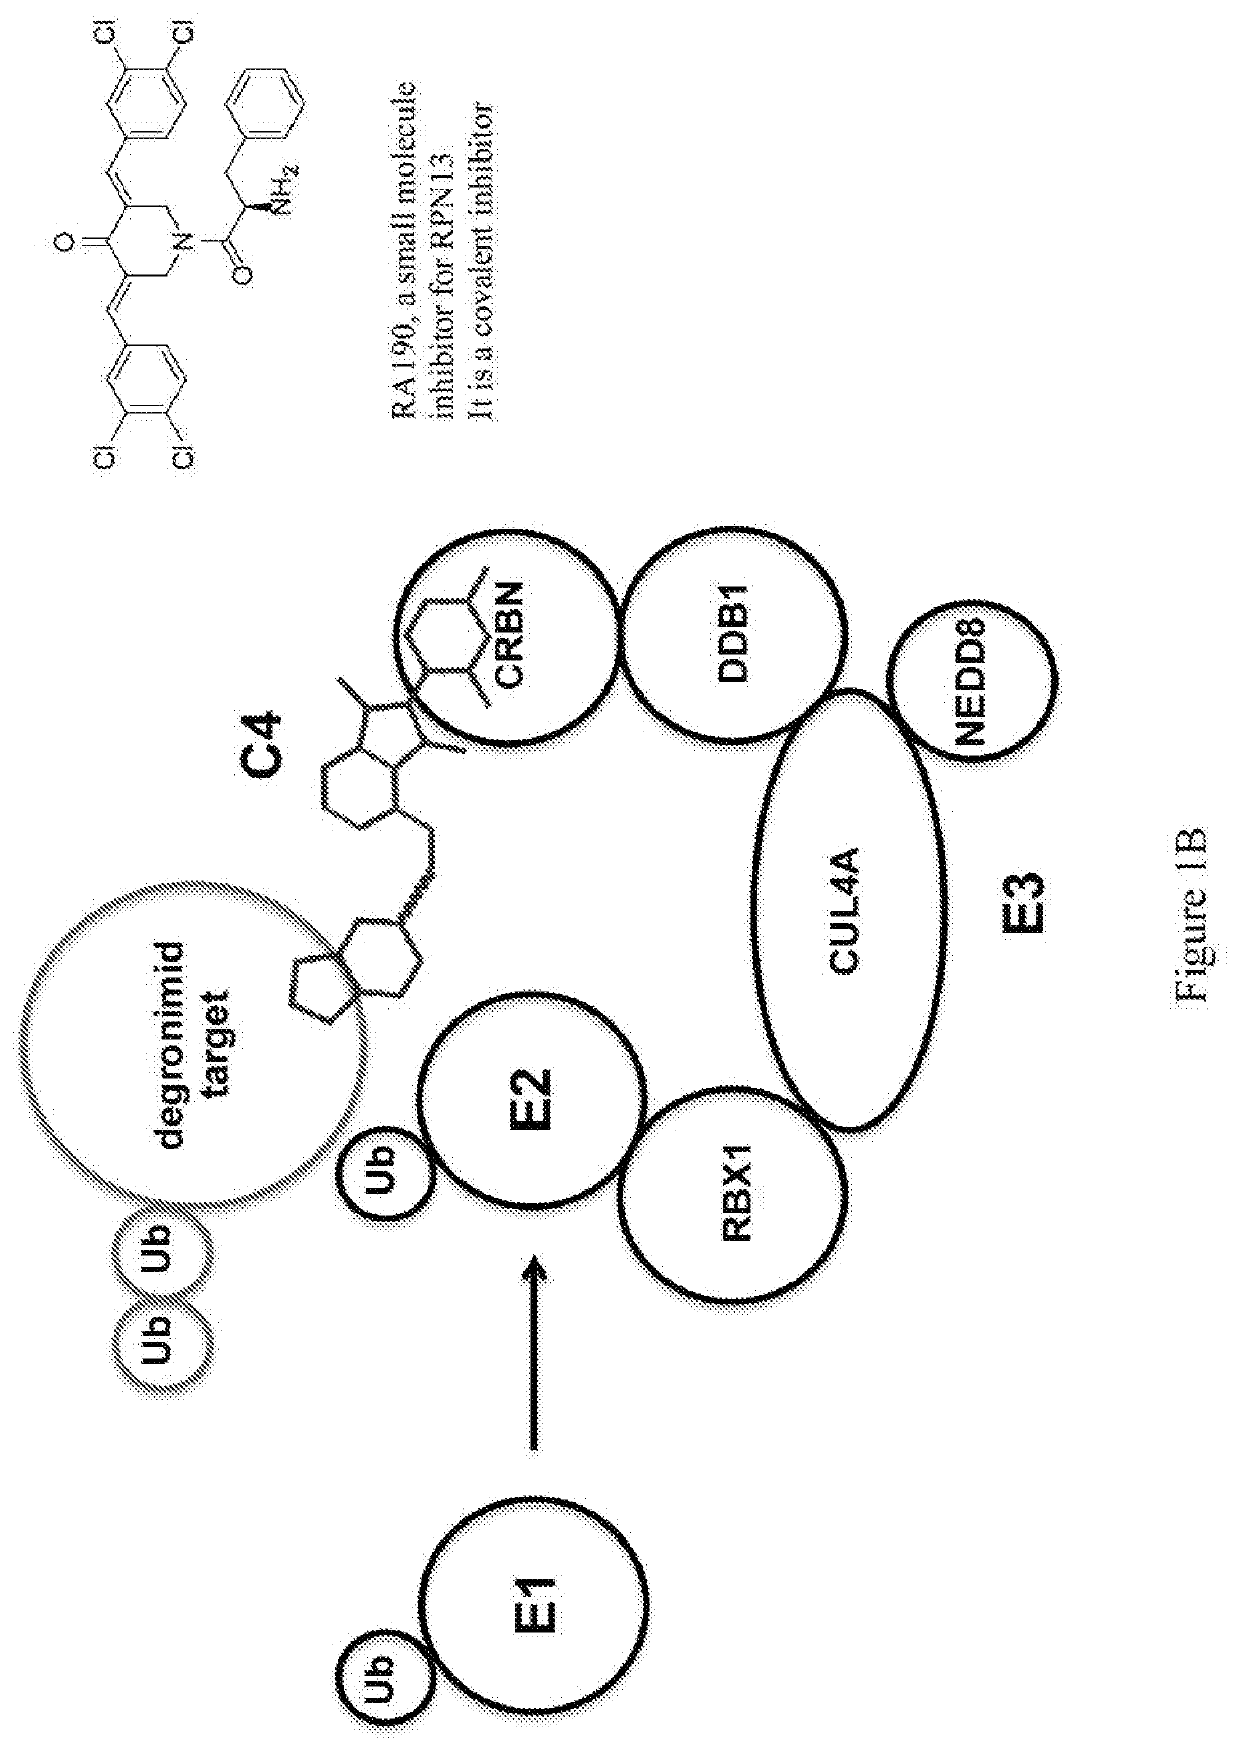 Small molecules that block proteasome-associated ubiquitin receptor rpn13 function and uses thereof